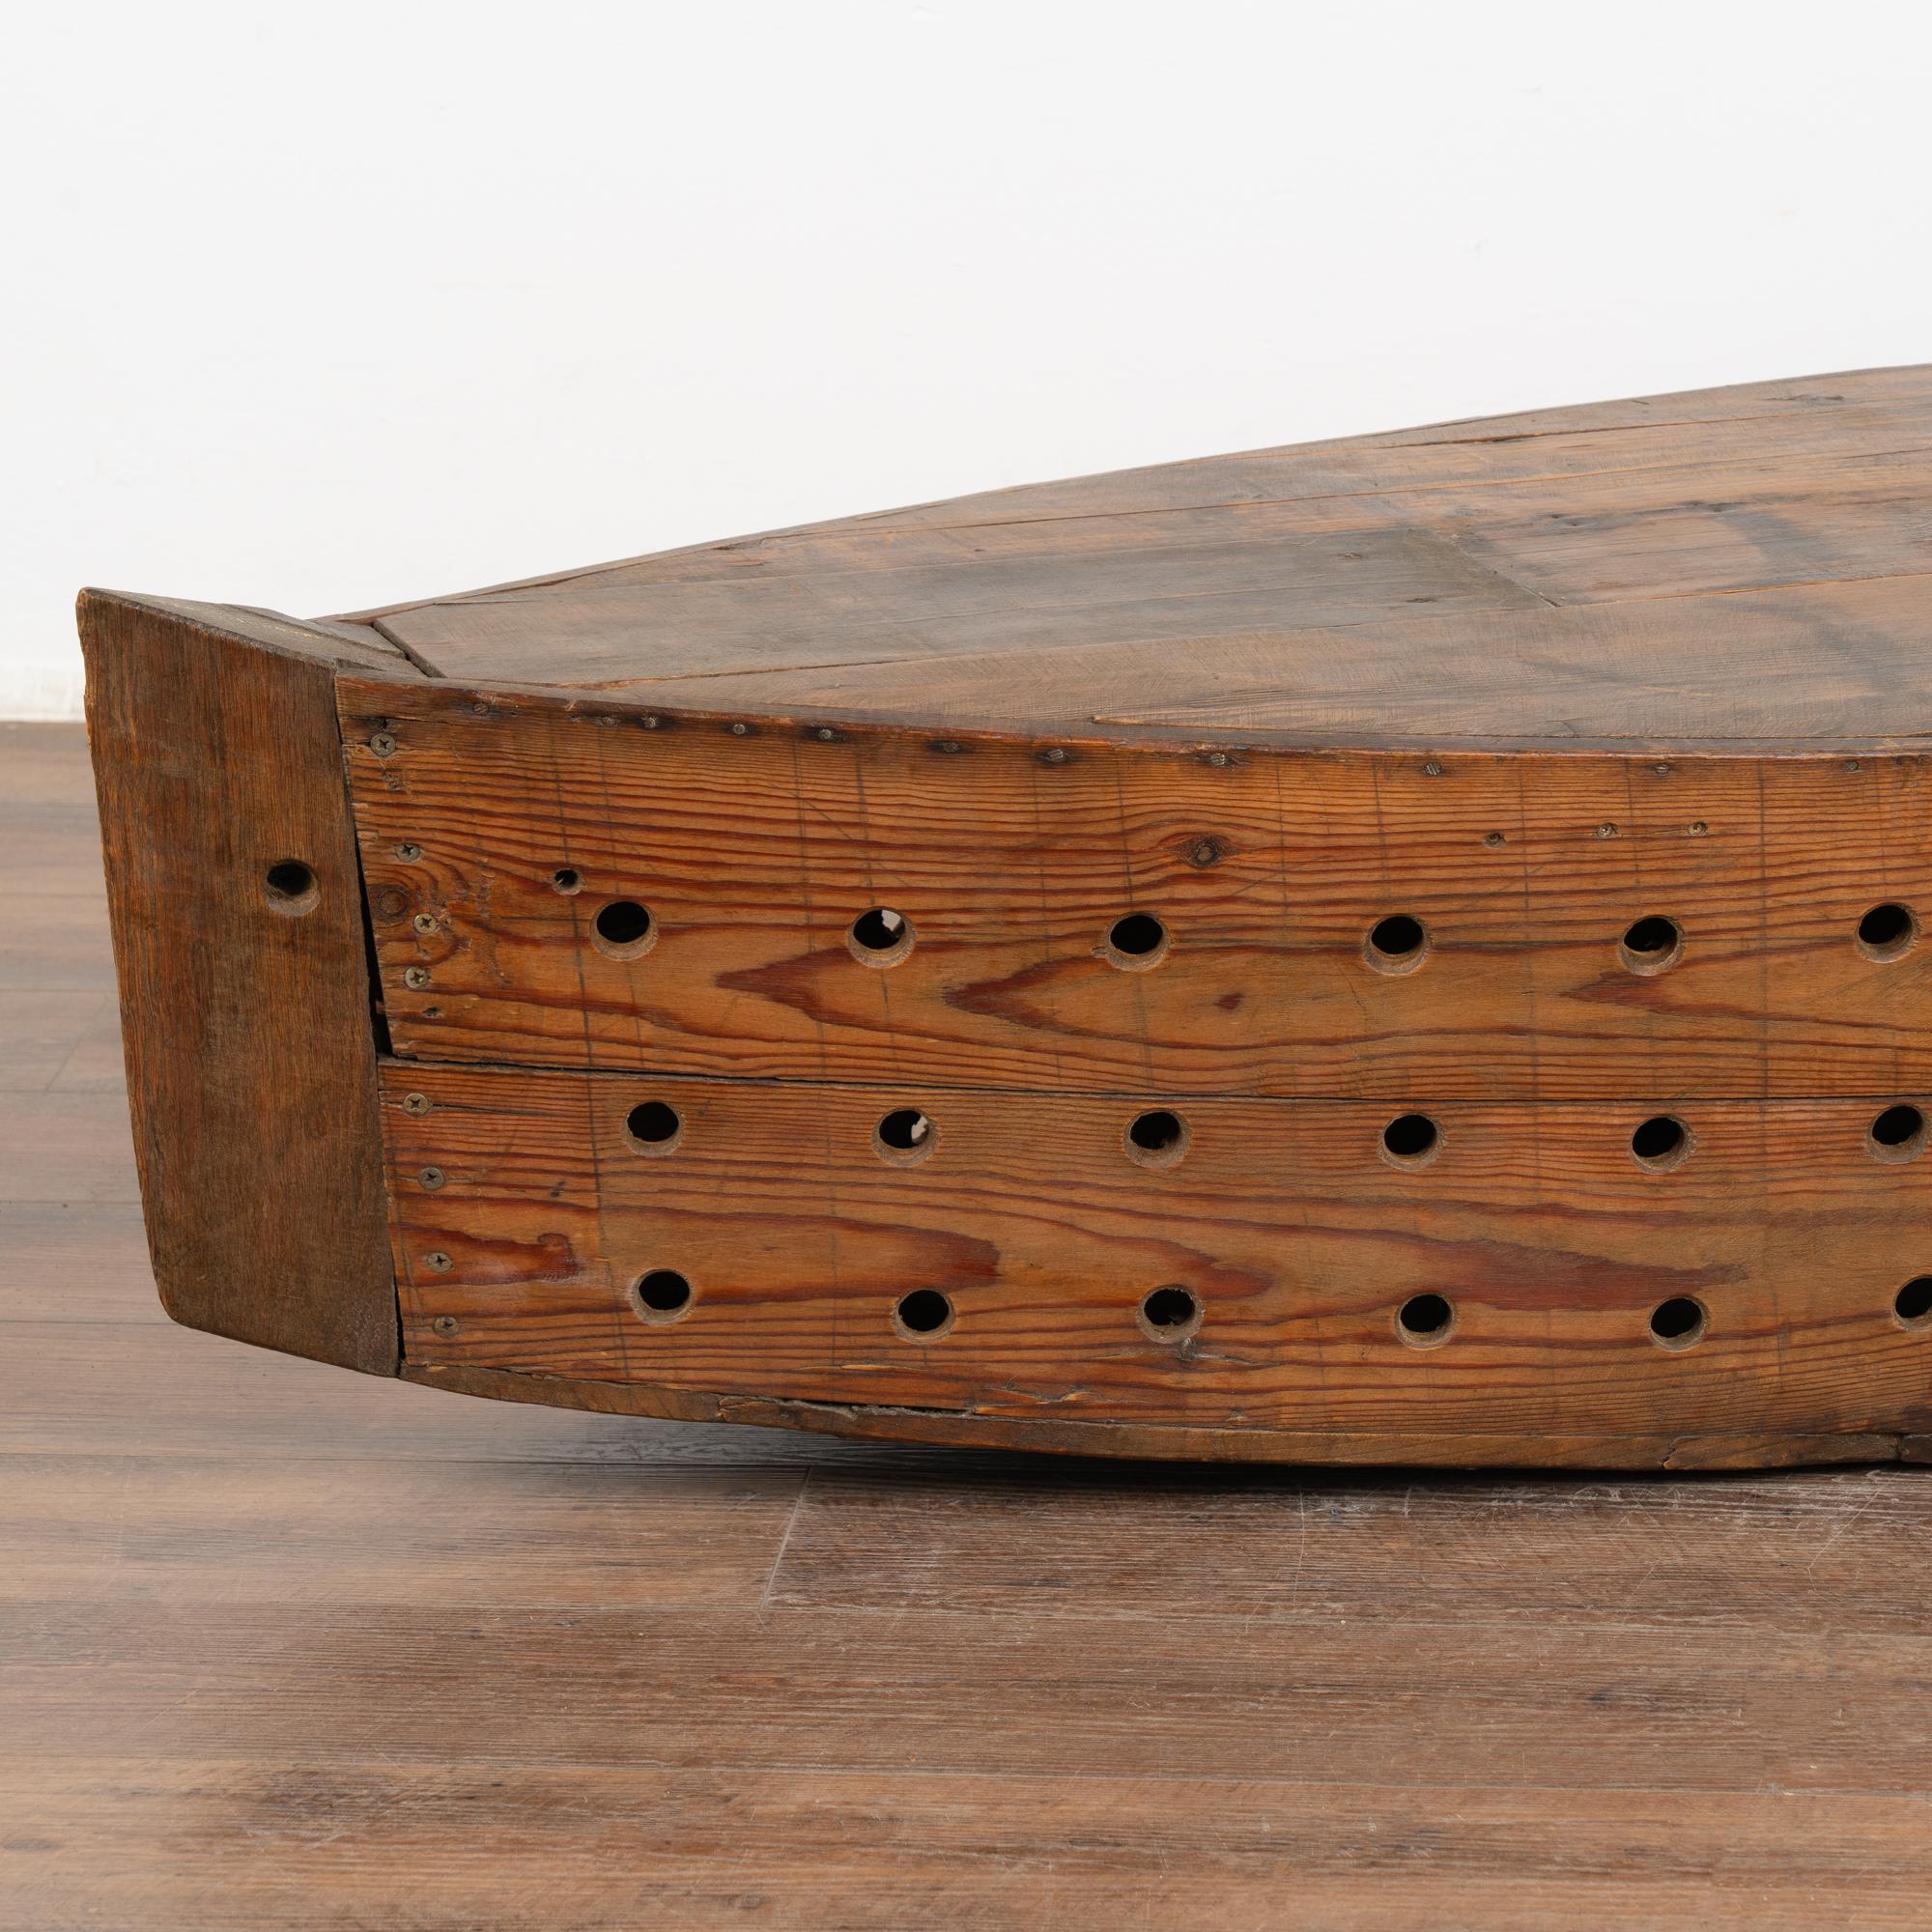 Rustic Decorative Model Boat With Holes For Fishing or Large Creel, circa 1940 In Good Condition For Sale In Round Top, TX